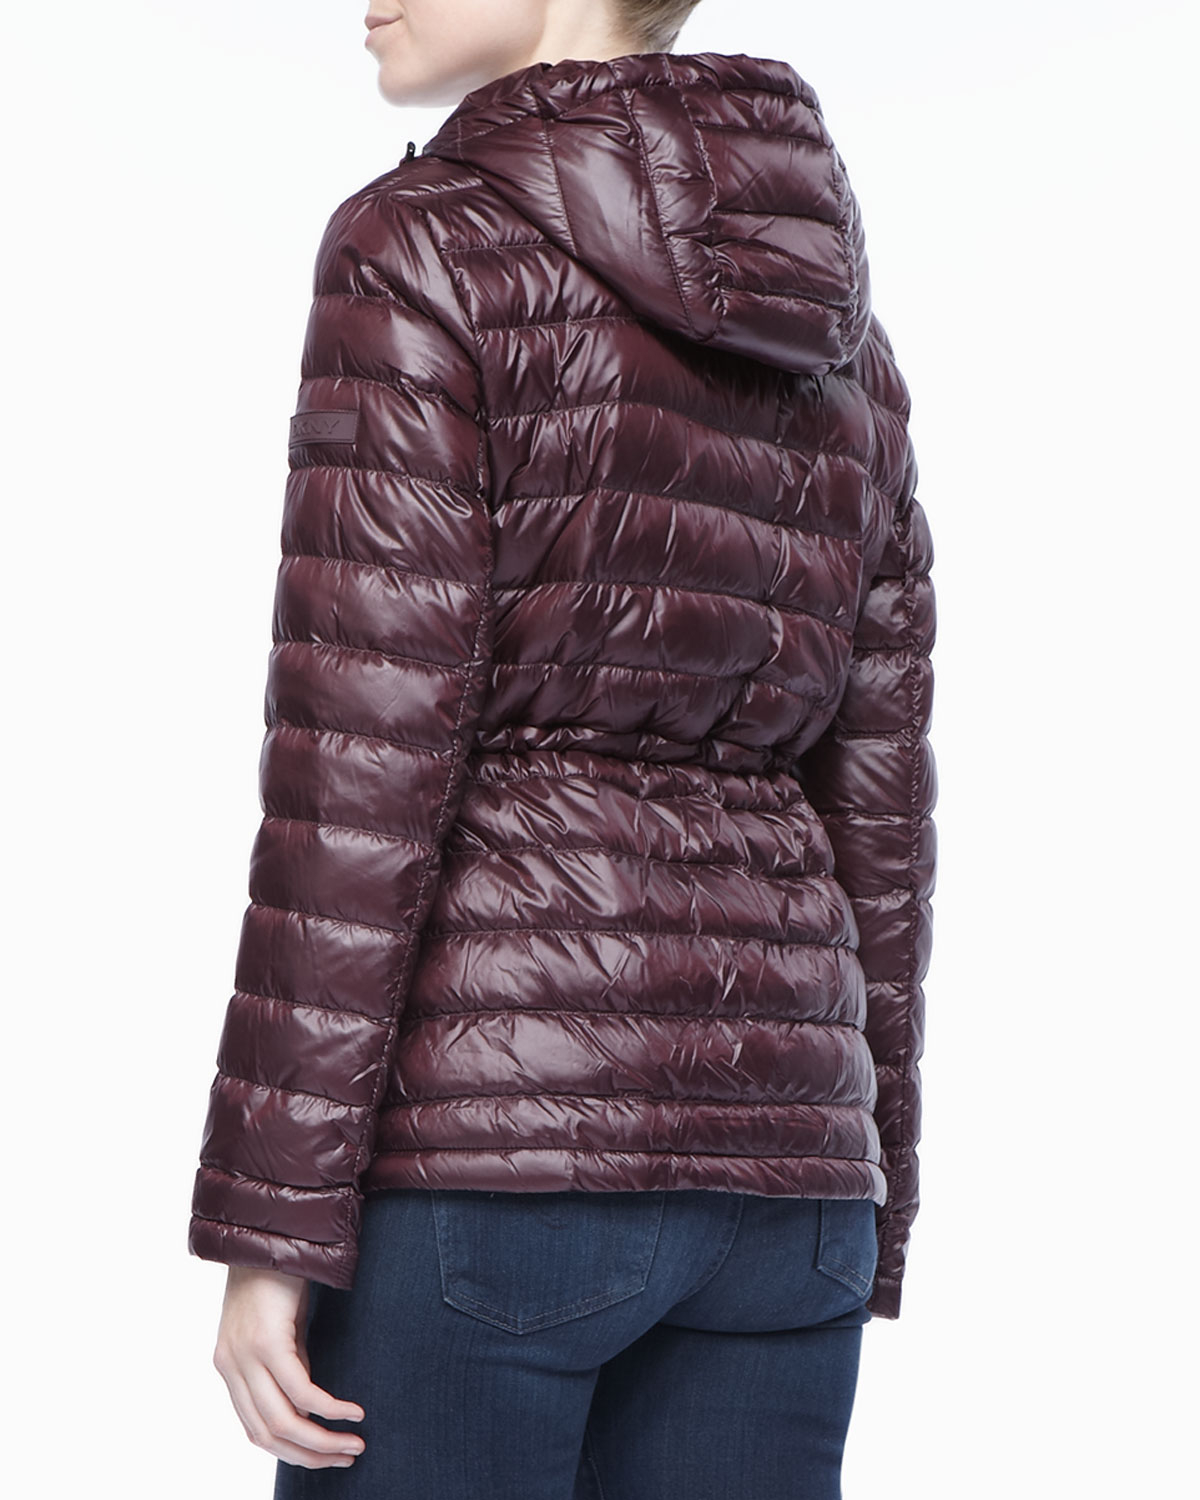 Dkny Hooded Anorak Puffer Jacket With Cinched Waist in Purple (HUNTRESS ...